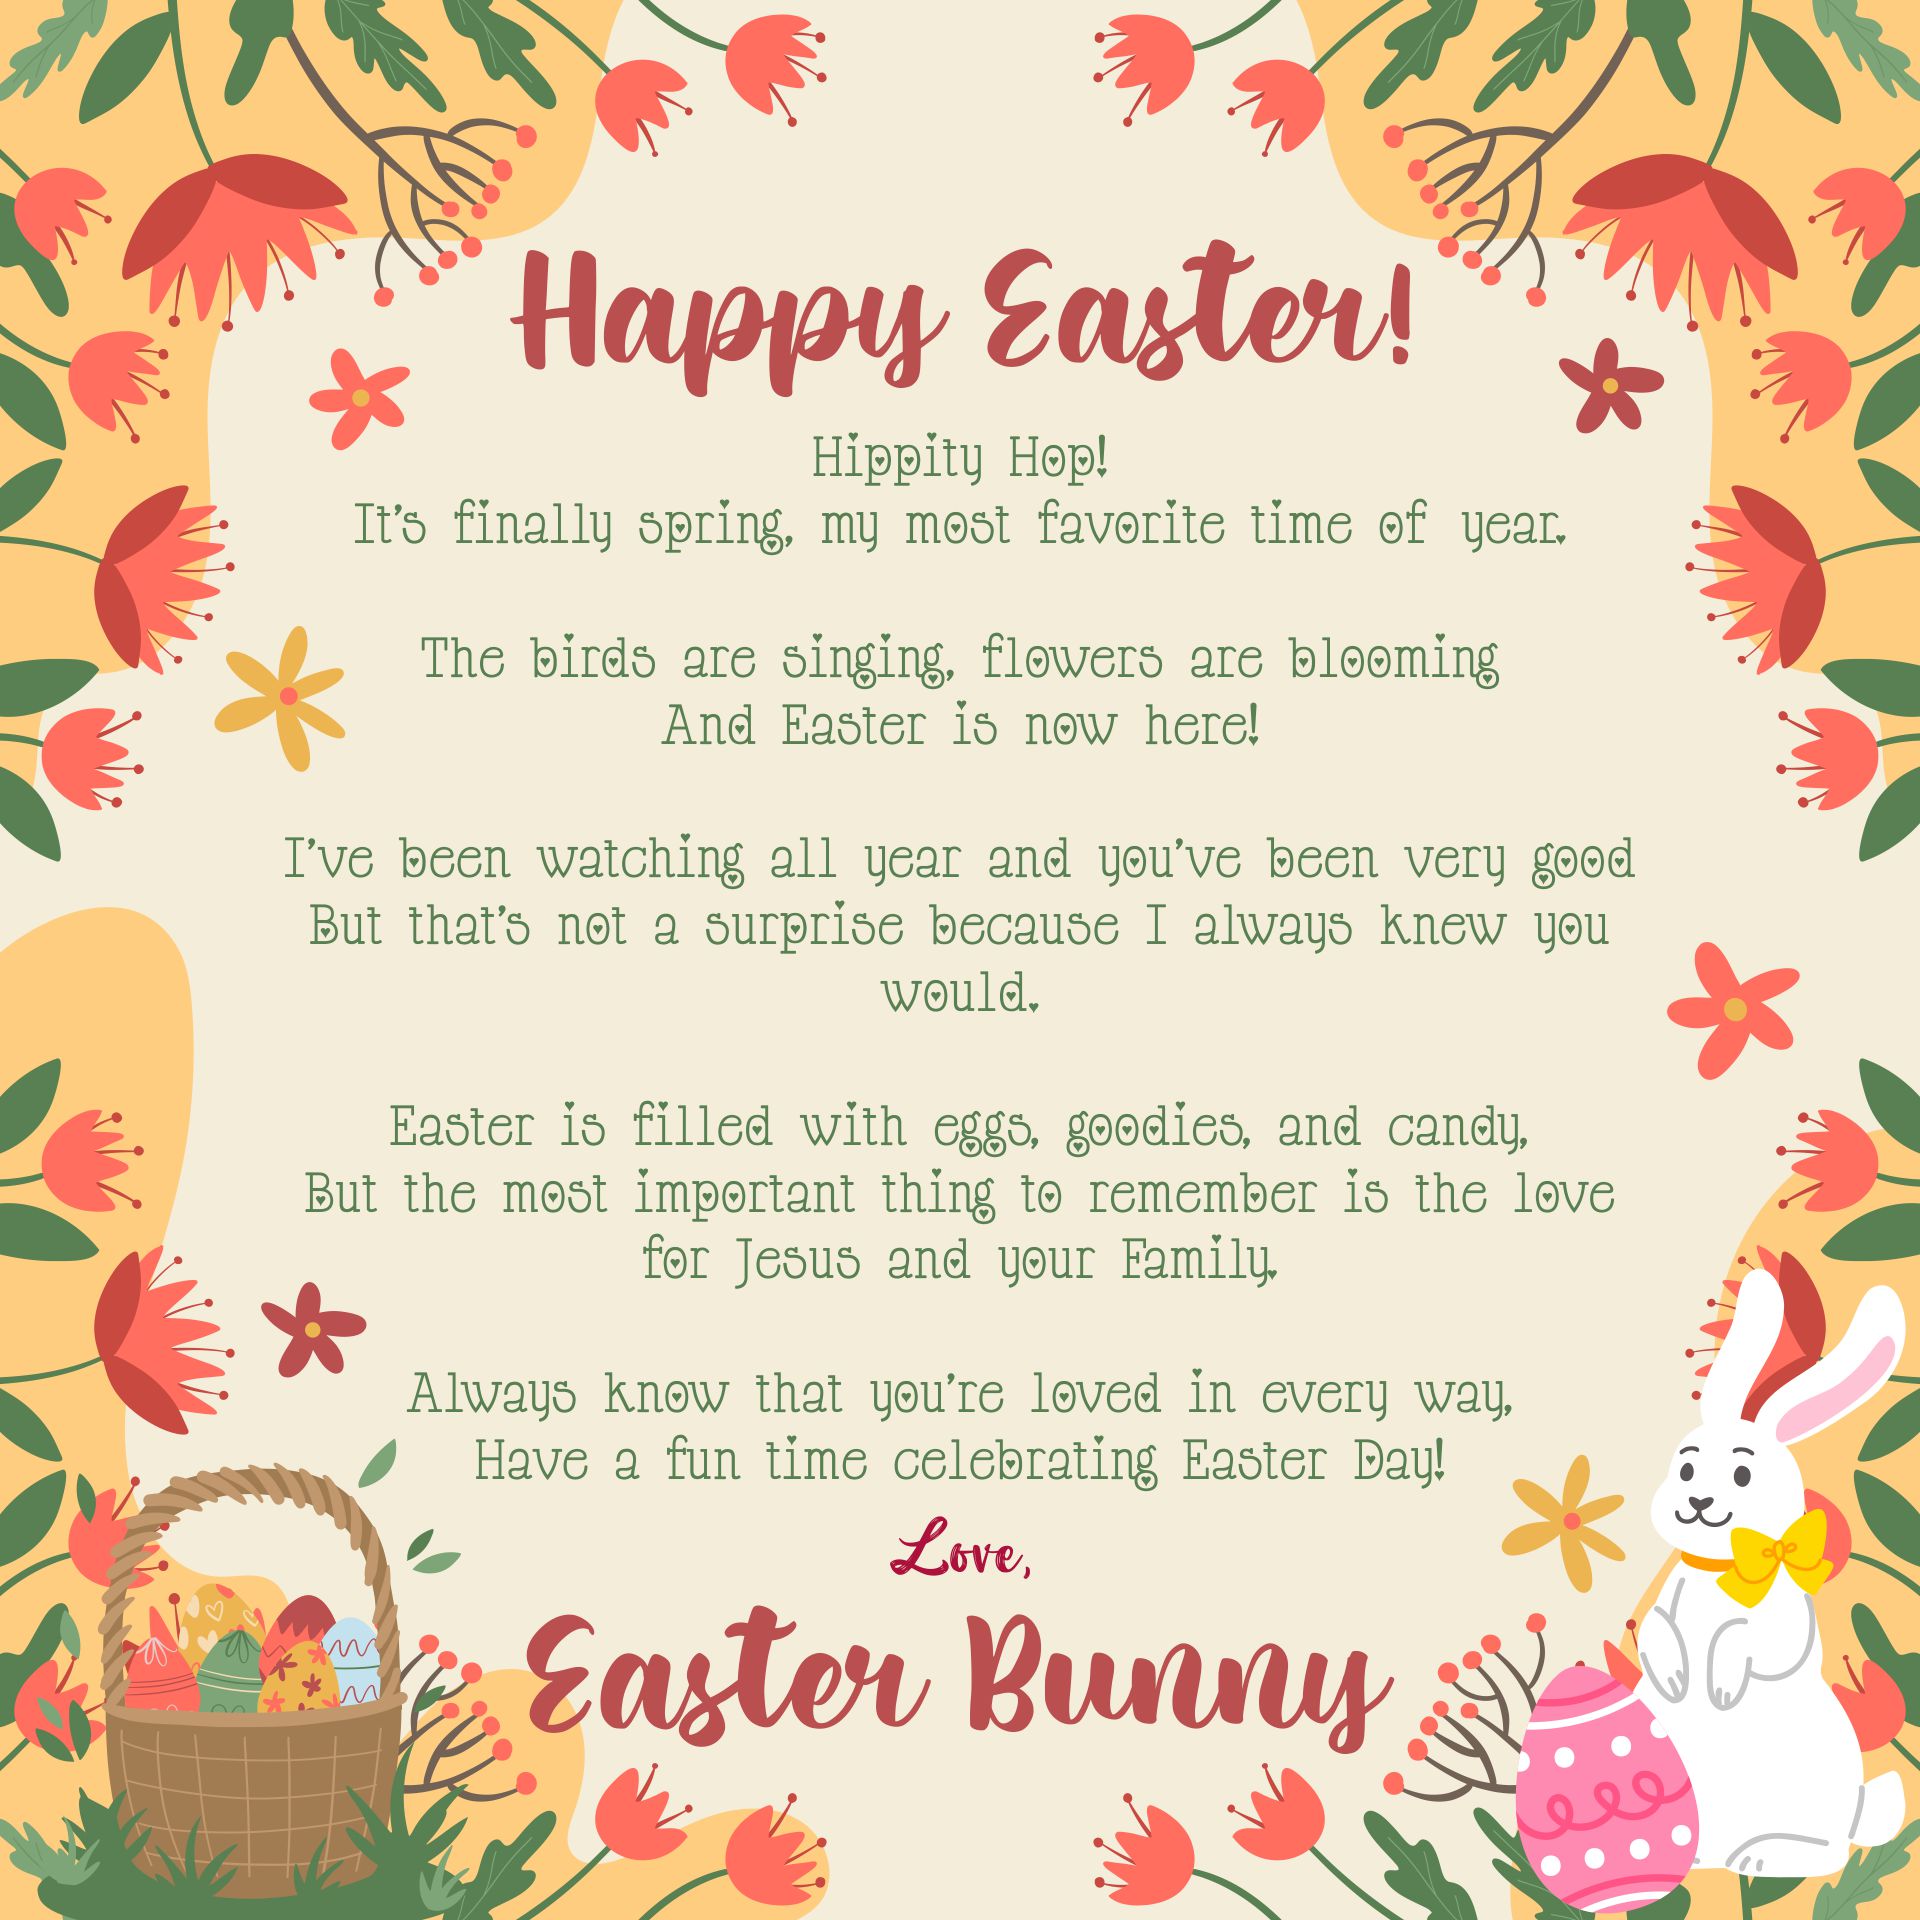 Printable Note From the Easter Bunny